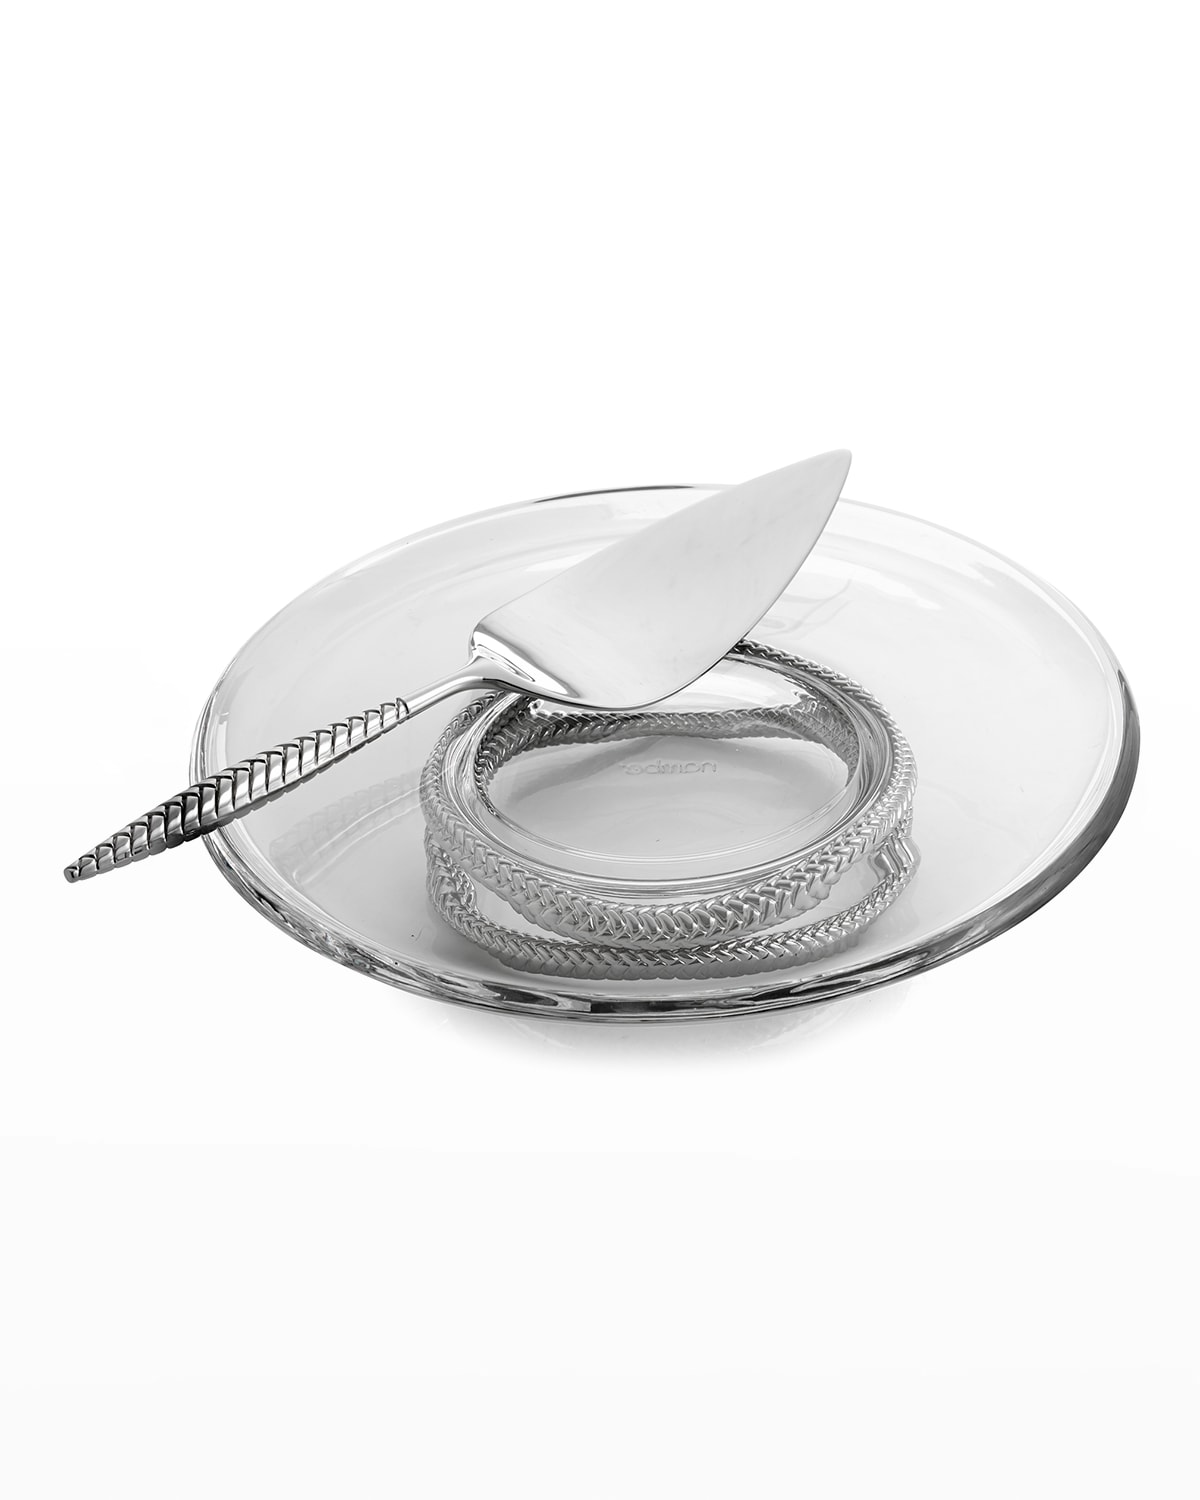 Shop Nambe Braid Glass Cake Platter In Silver And Clear